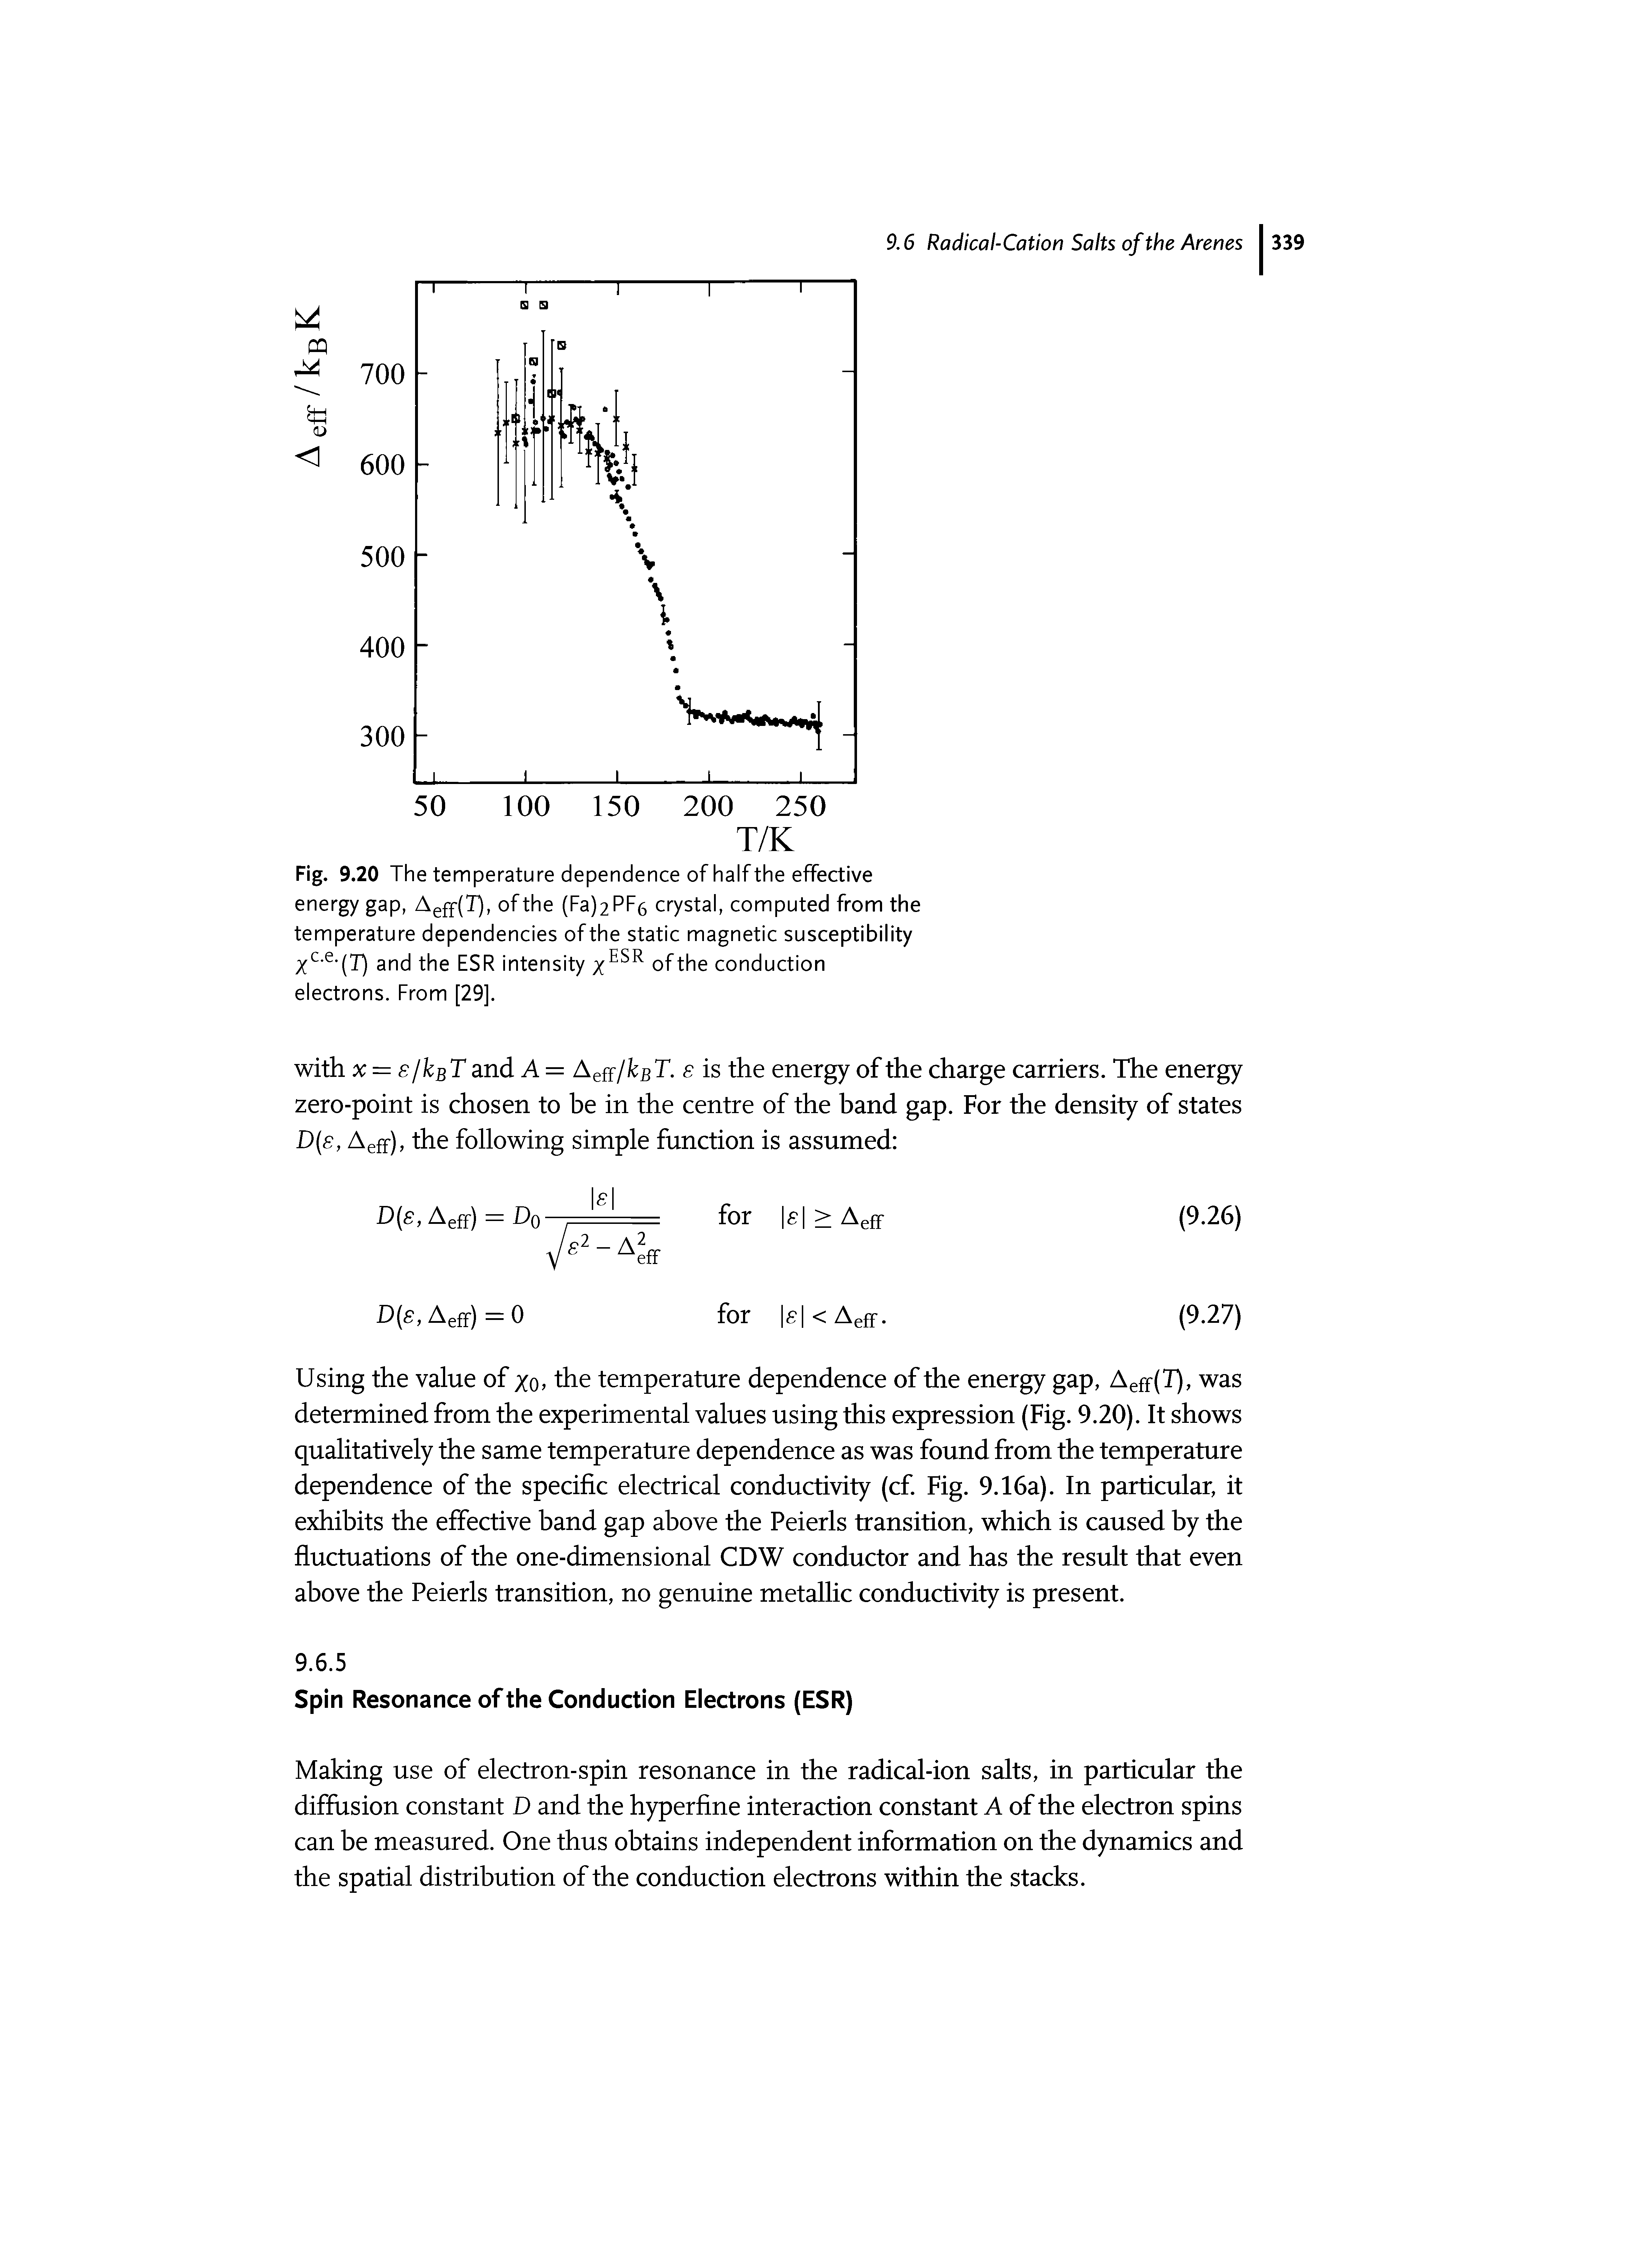 Fig. 9.20 The temperature dependence of half the effective energy gap, Aeff(T), of the (Fa)2PF6 crystal, computed from the temperature dependencies of the static magnetic susceptibility and the ESR intensity (ESR of the conduction electrons. From [29].